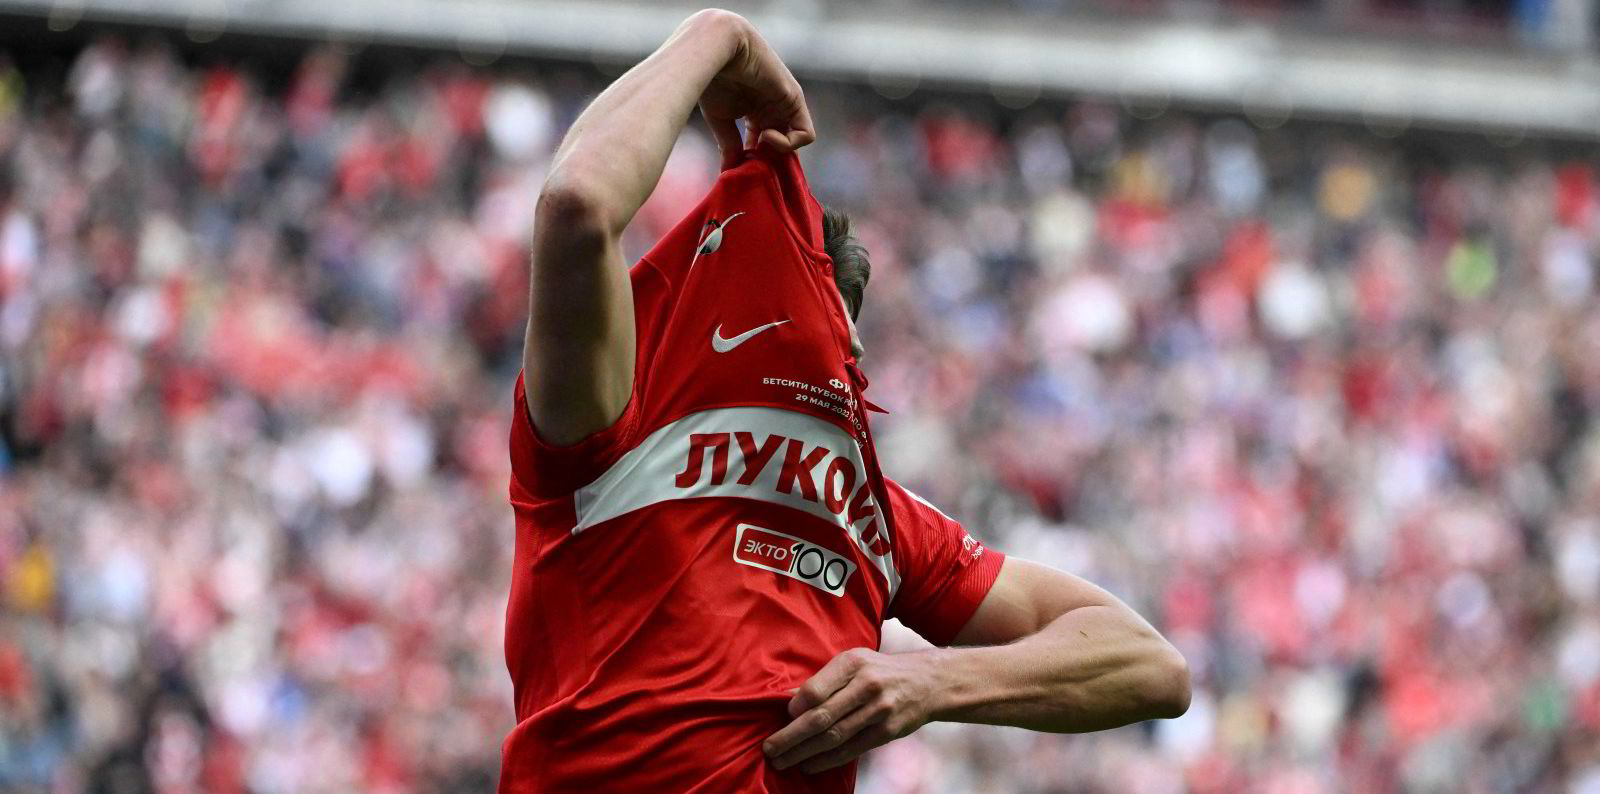 Russia thrown out of football as Spartak Moscow brand ban